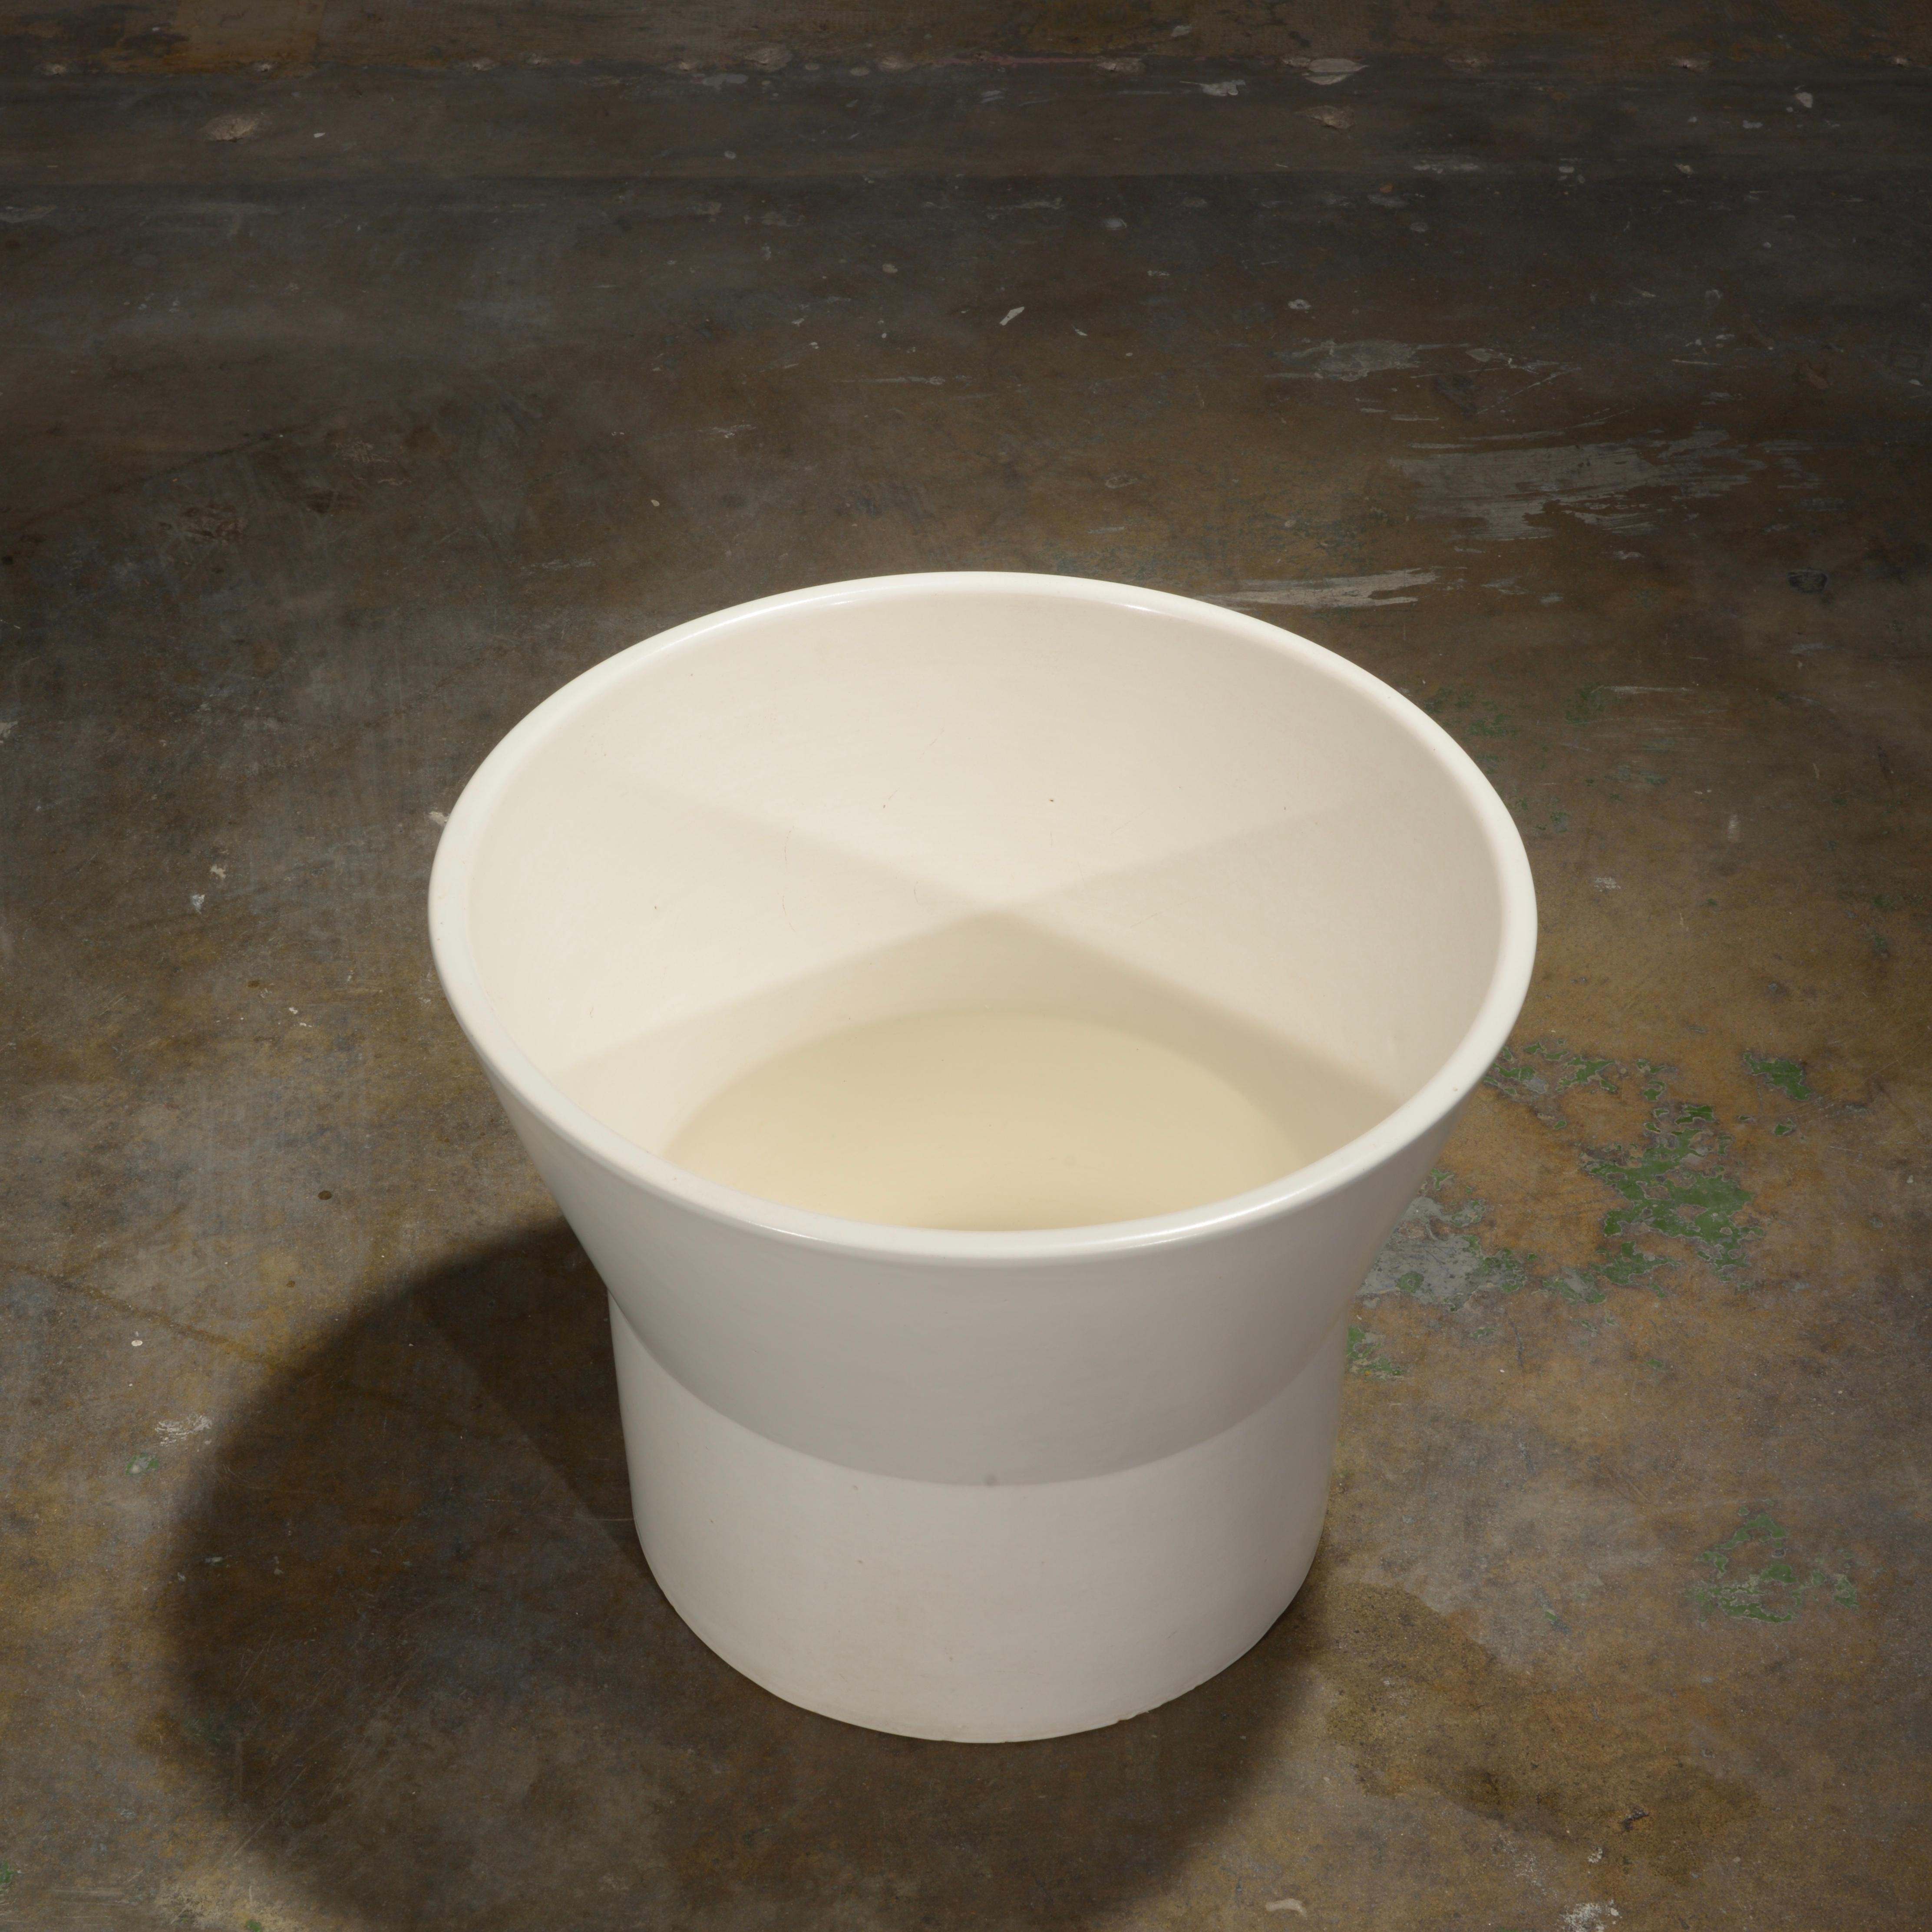 Paul Mccobb for Architectural Pottery White M-2 Planter, 1964 For Sale 2